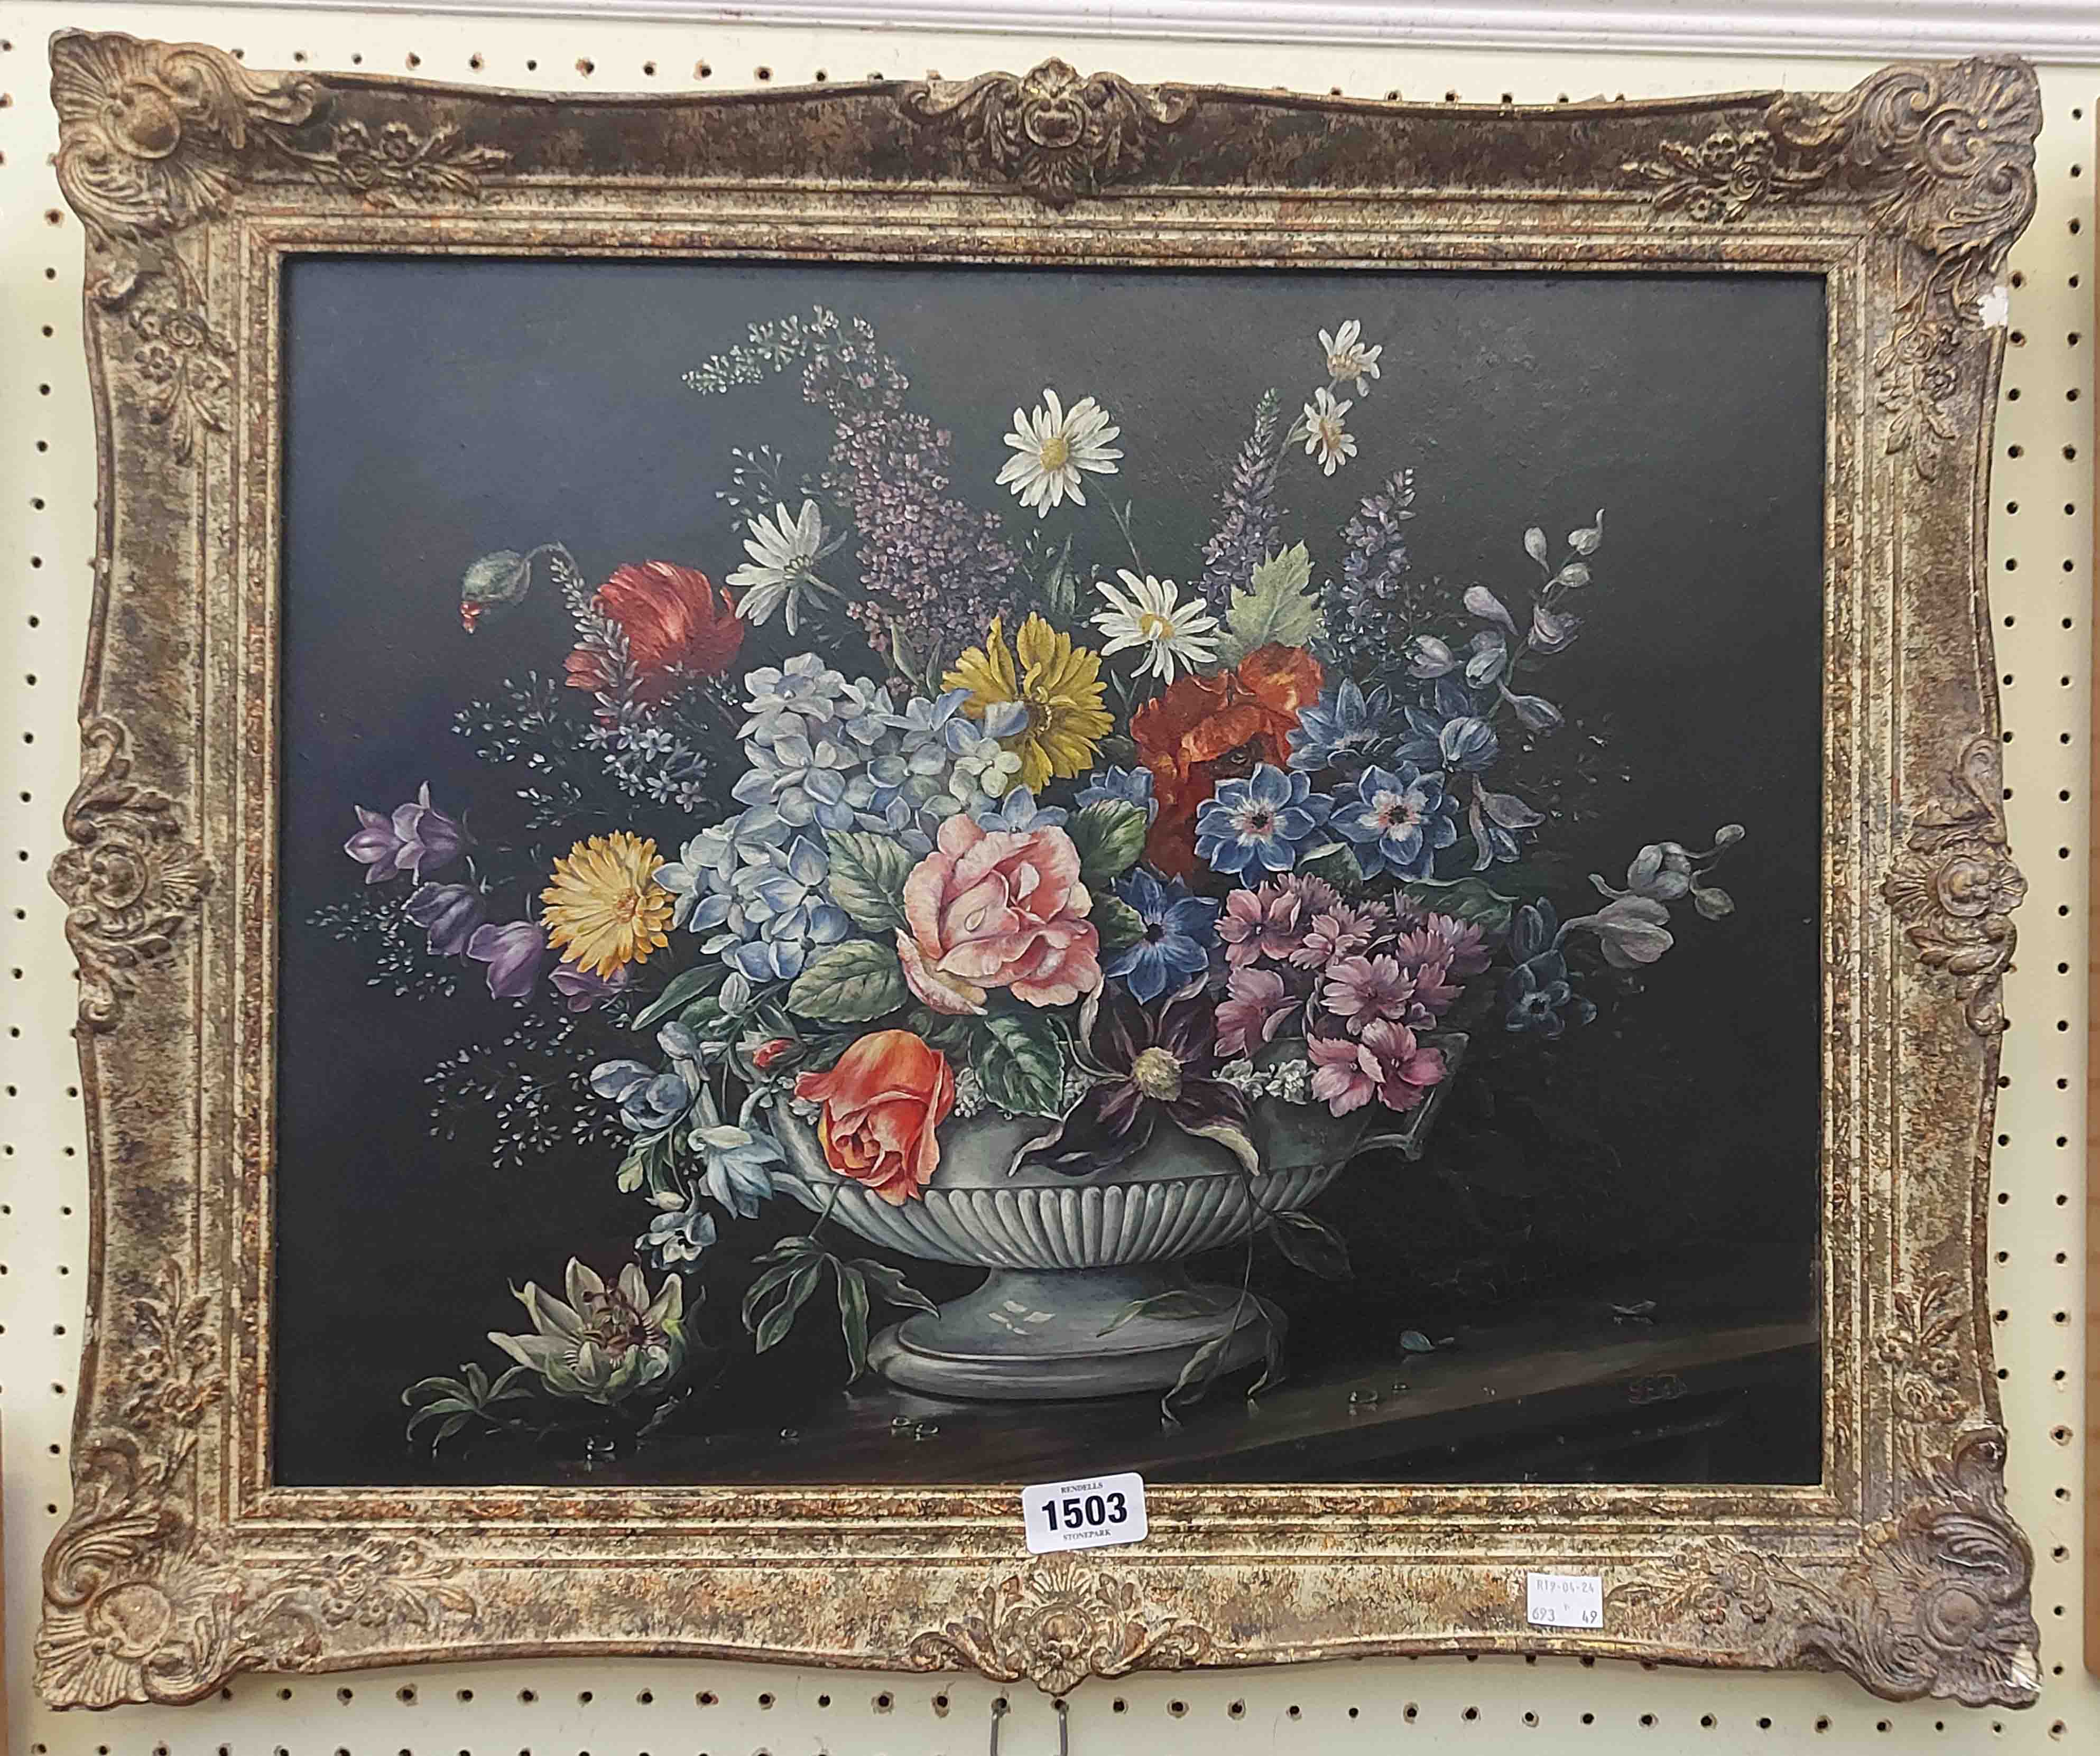 Shielo: an antiqued framed oil on panel still life with urn of flowers on a surface and black